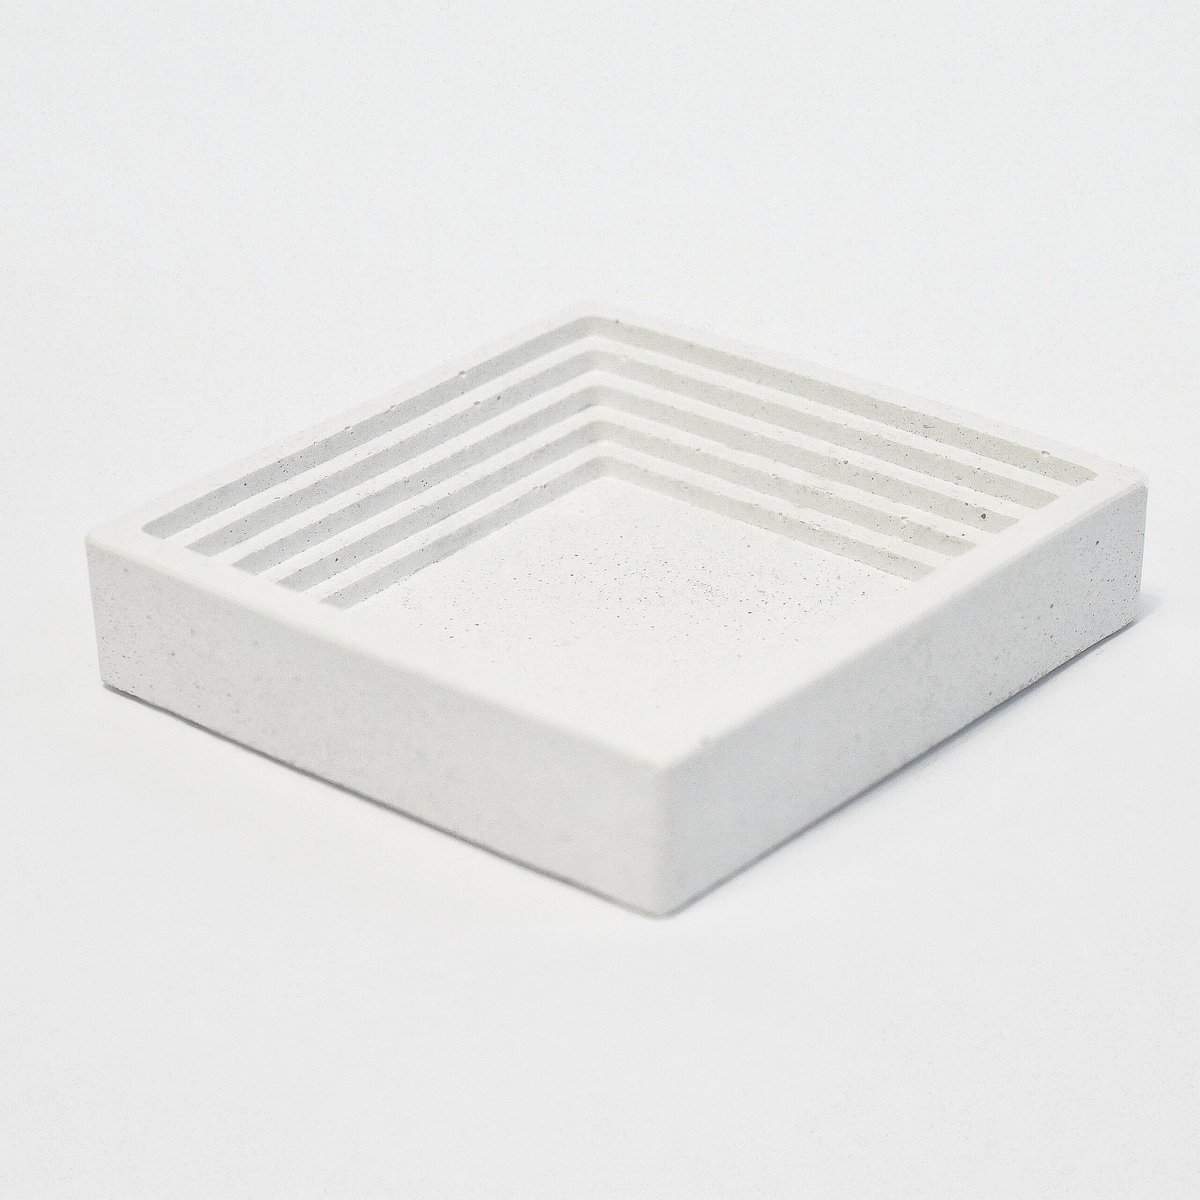 Concrete Charcoal Patterned Tray